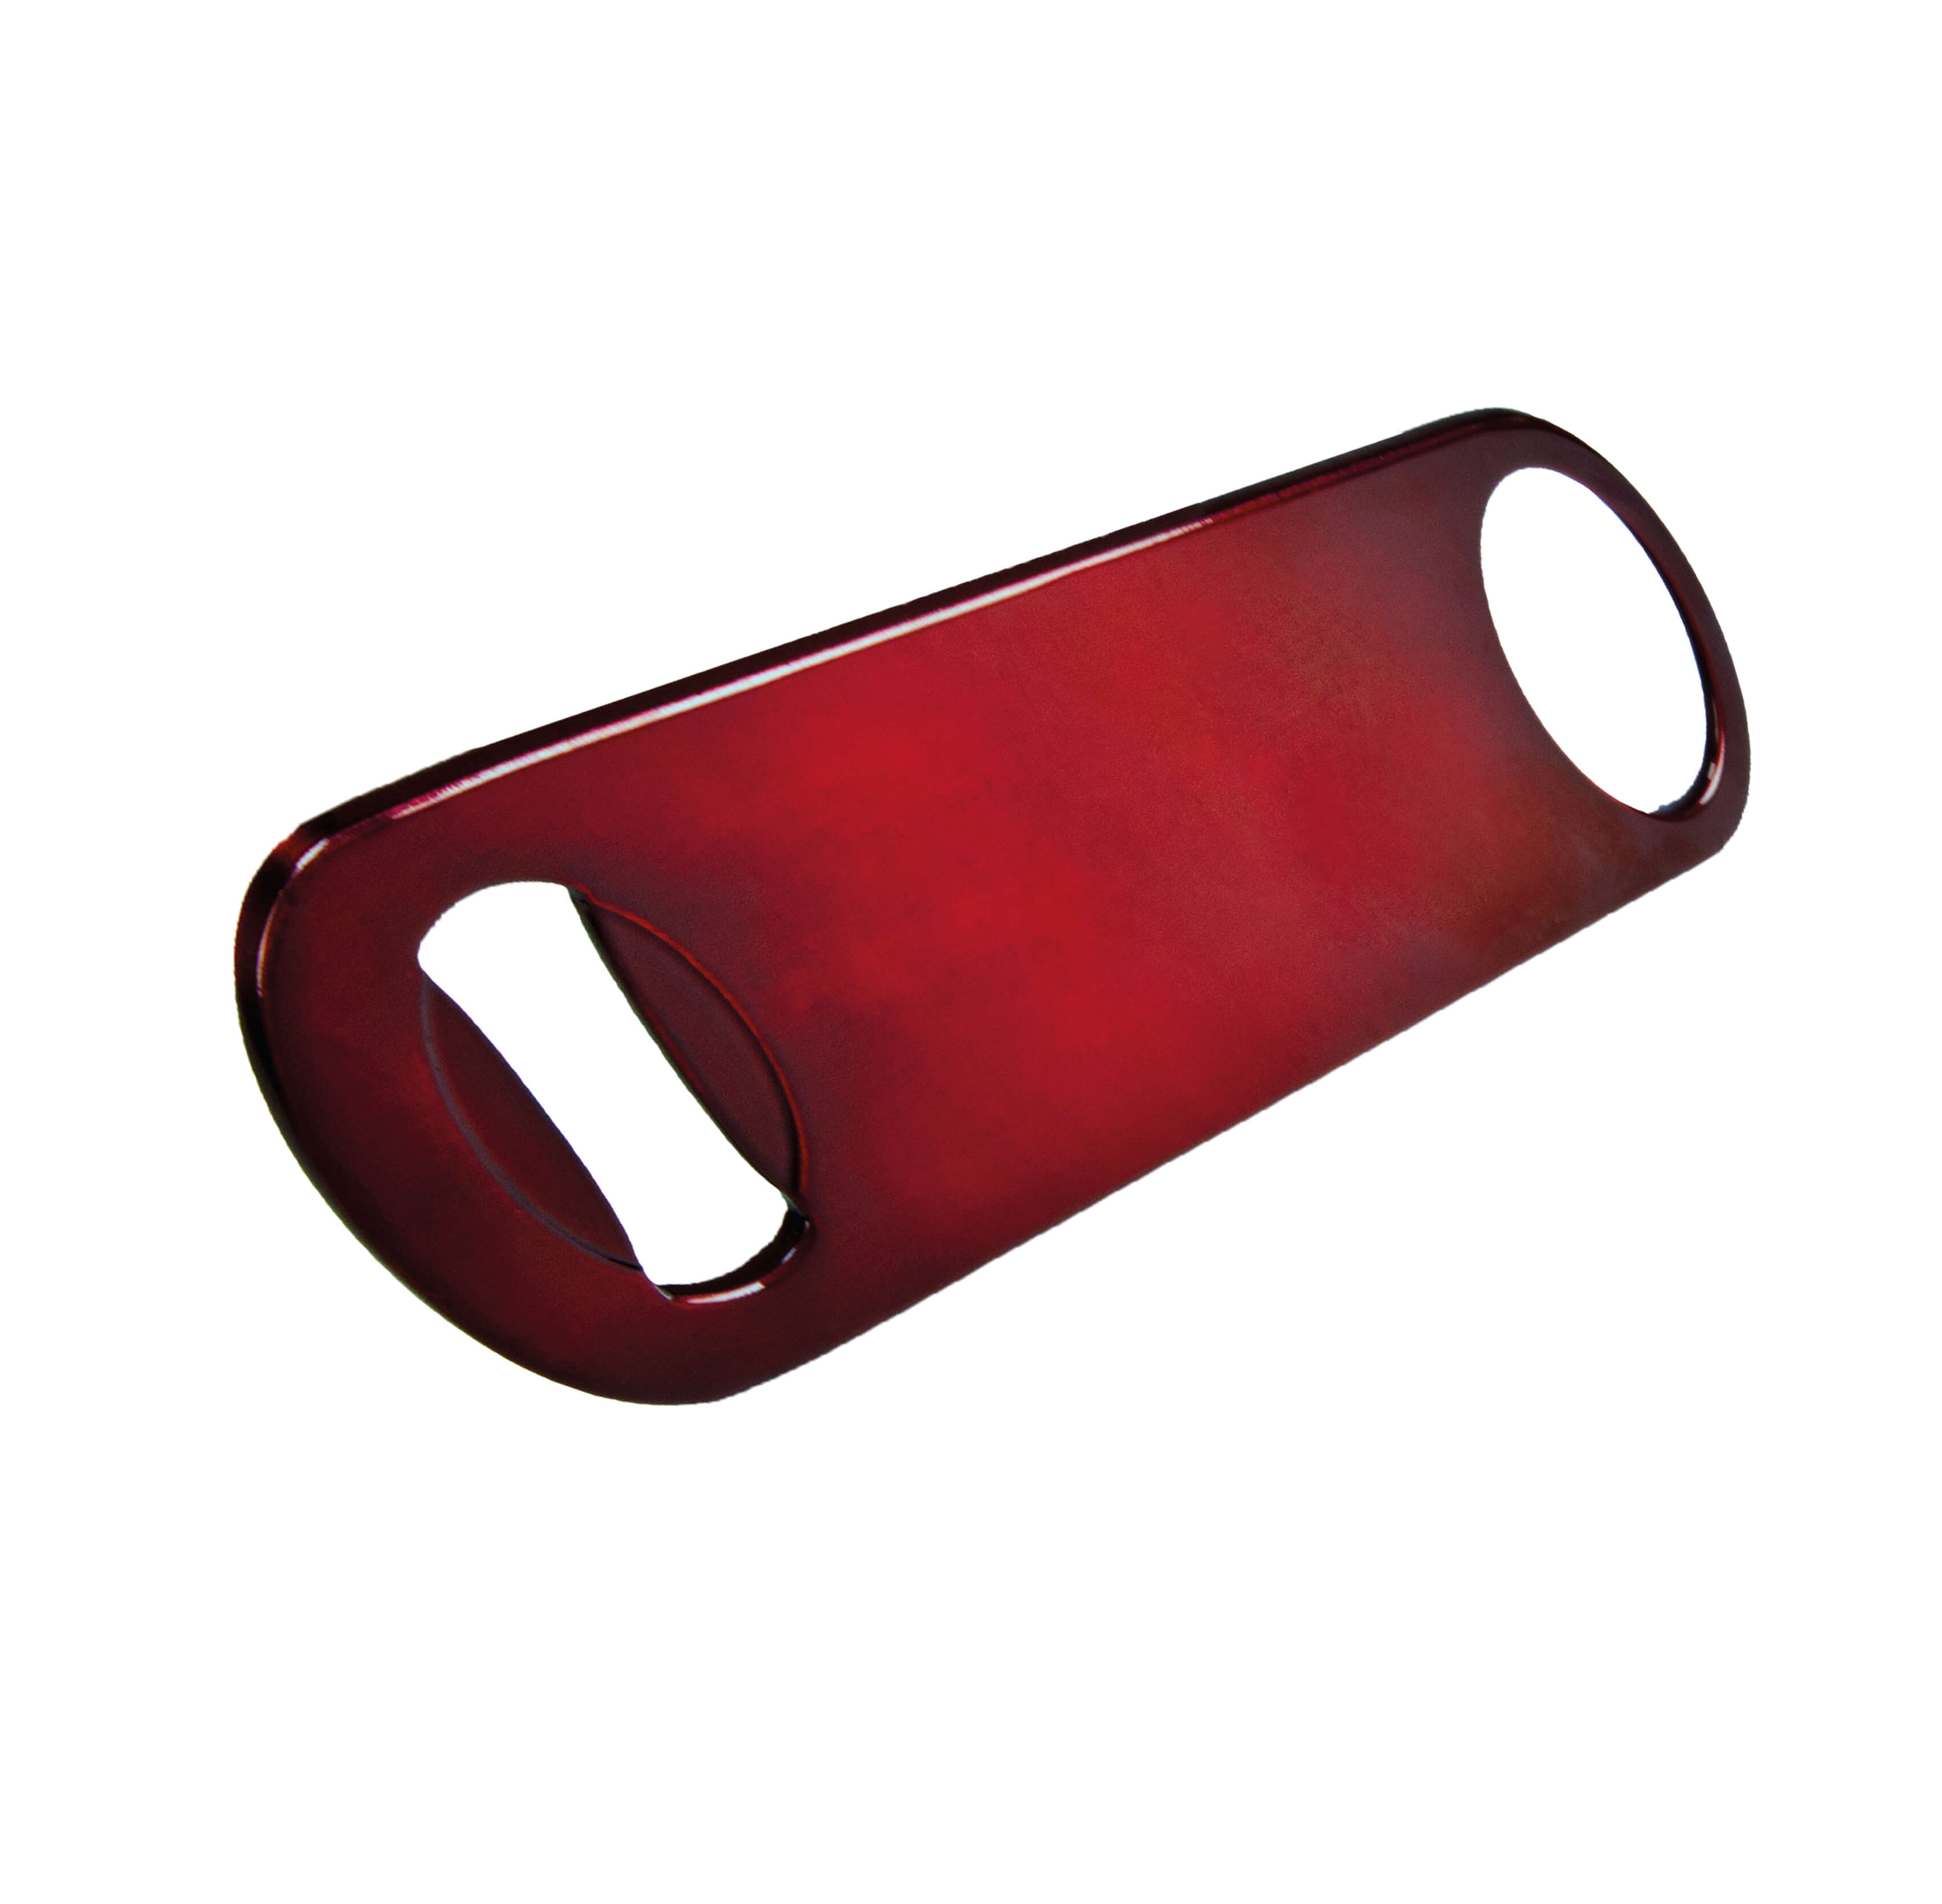 Cap lifter - speed opener, candy red